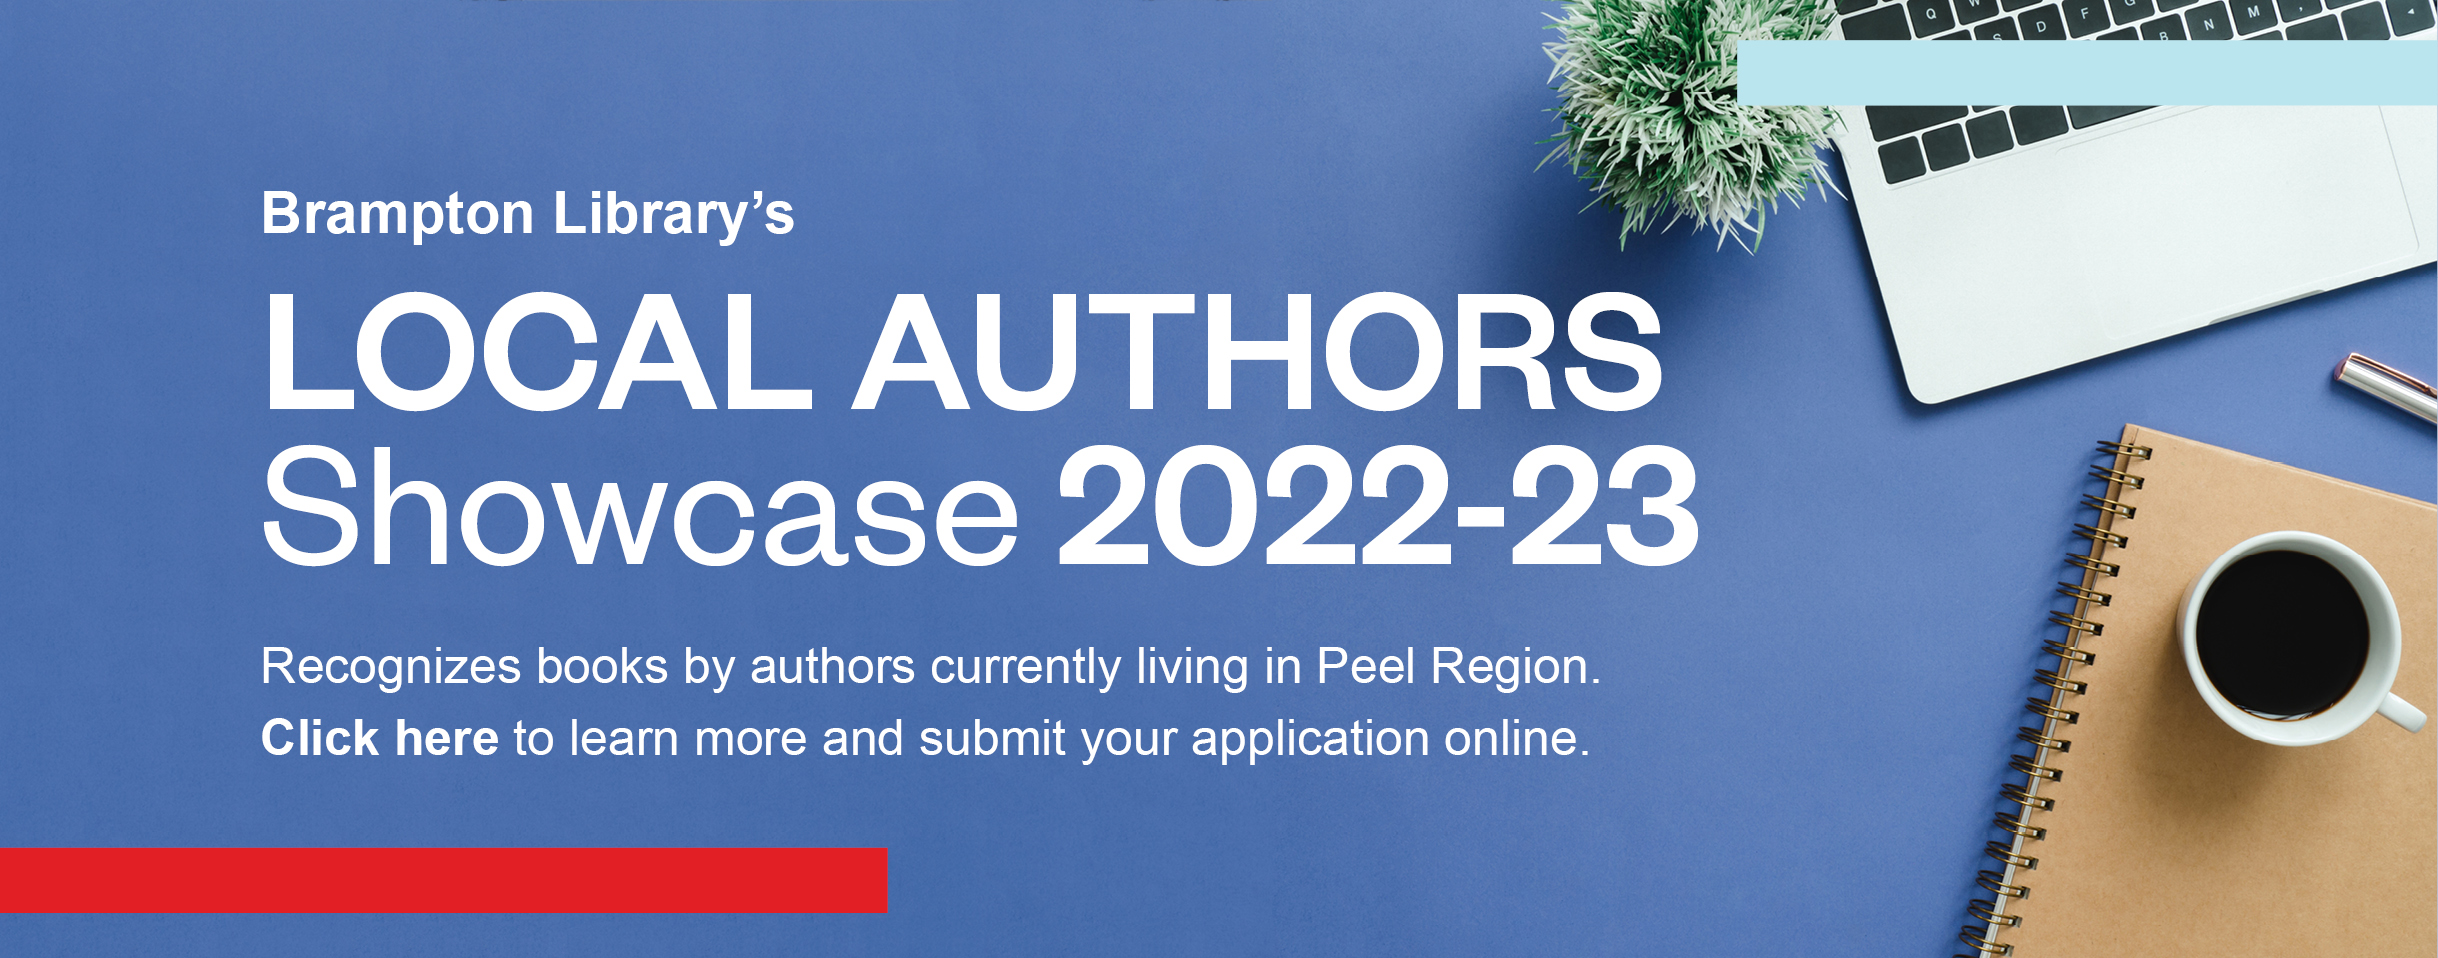 Brampton Library's Local Authors Showcase 2022-2023. Recognizes books by authors currently living in Peel Region. Click here to learn more and submit your application online. 